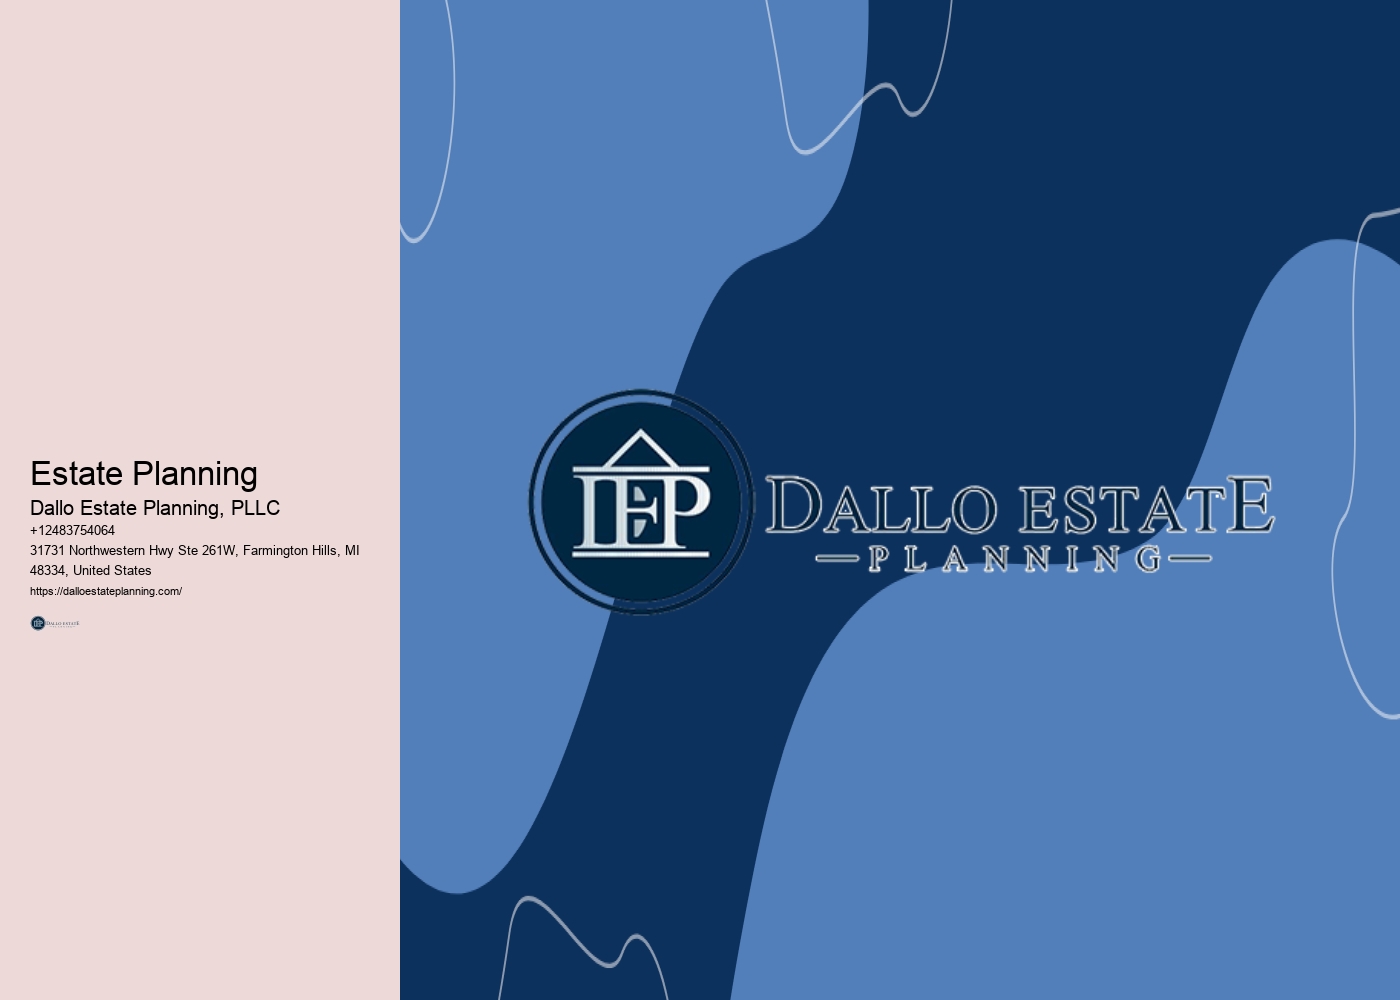 Tailored Estate Planning Solutions